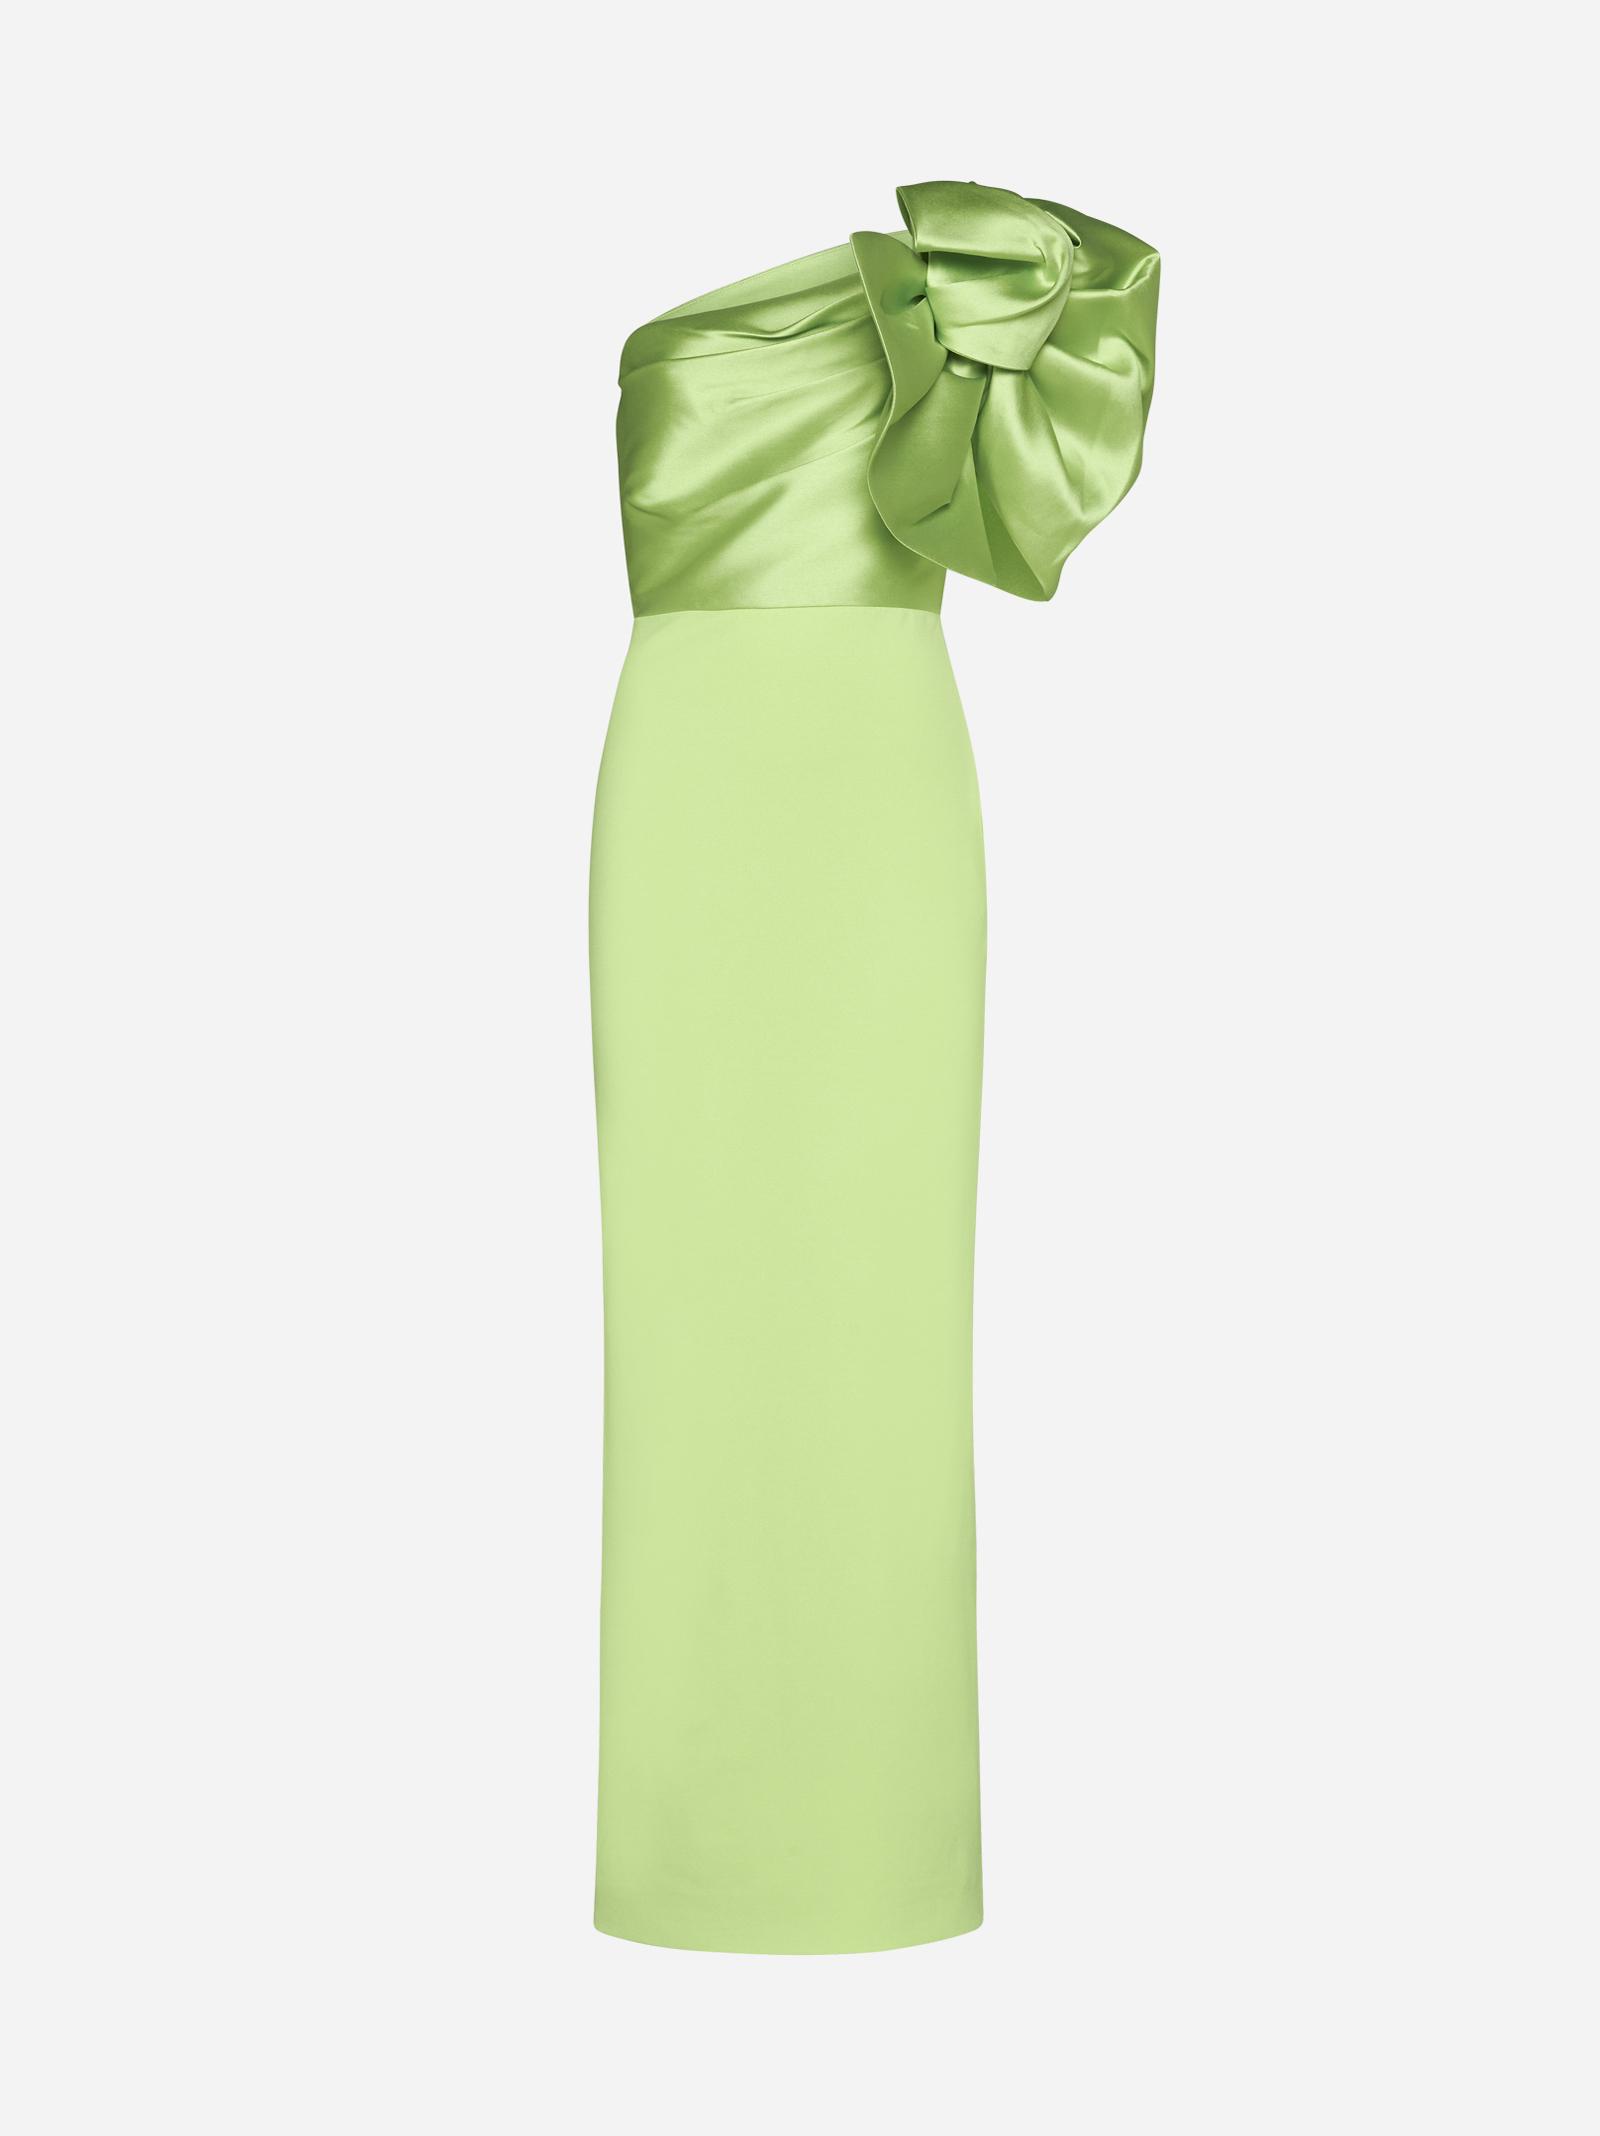 Solace London Iyana One Shoulder Maxi Dress in Green | Lyst